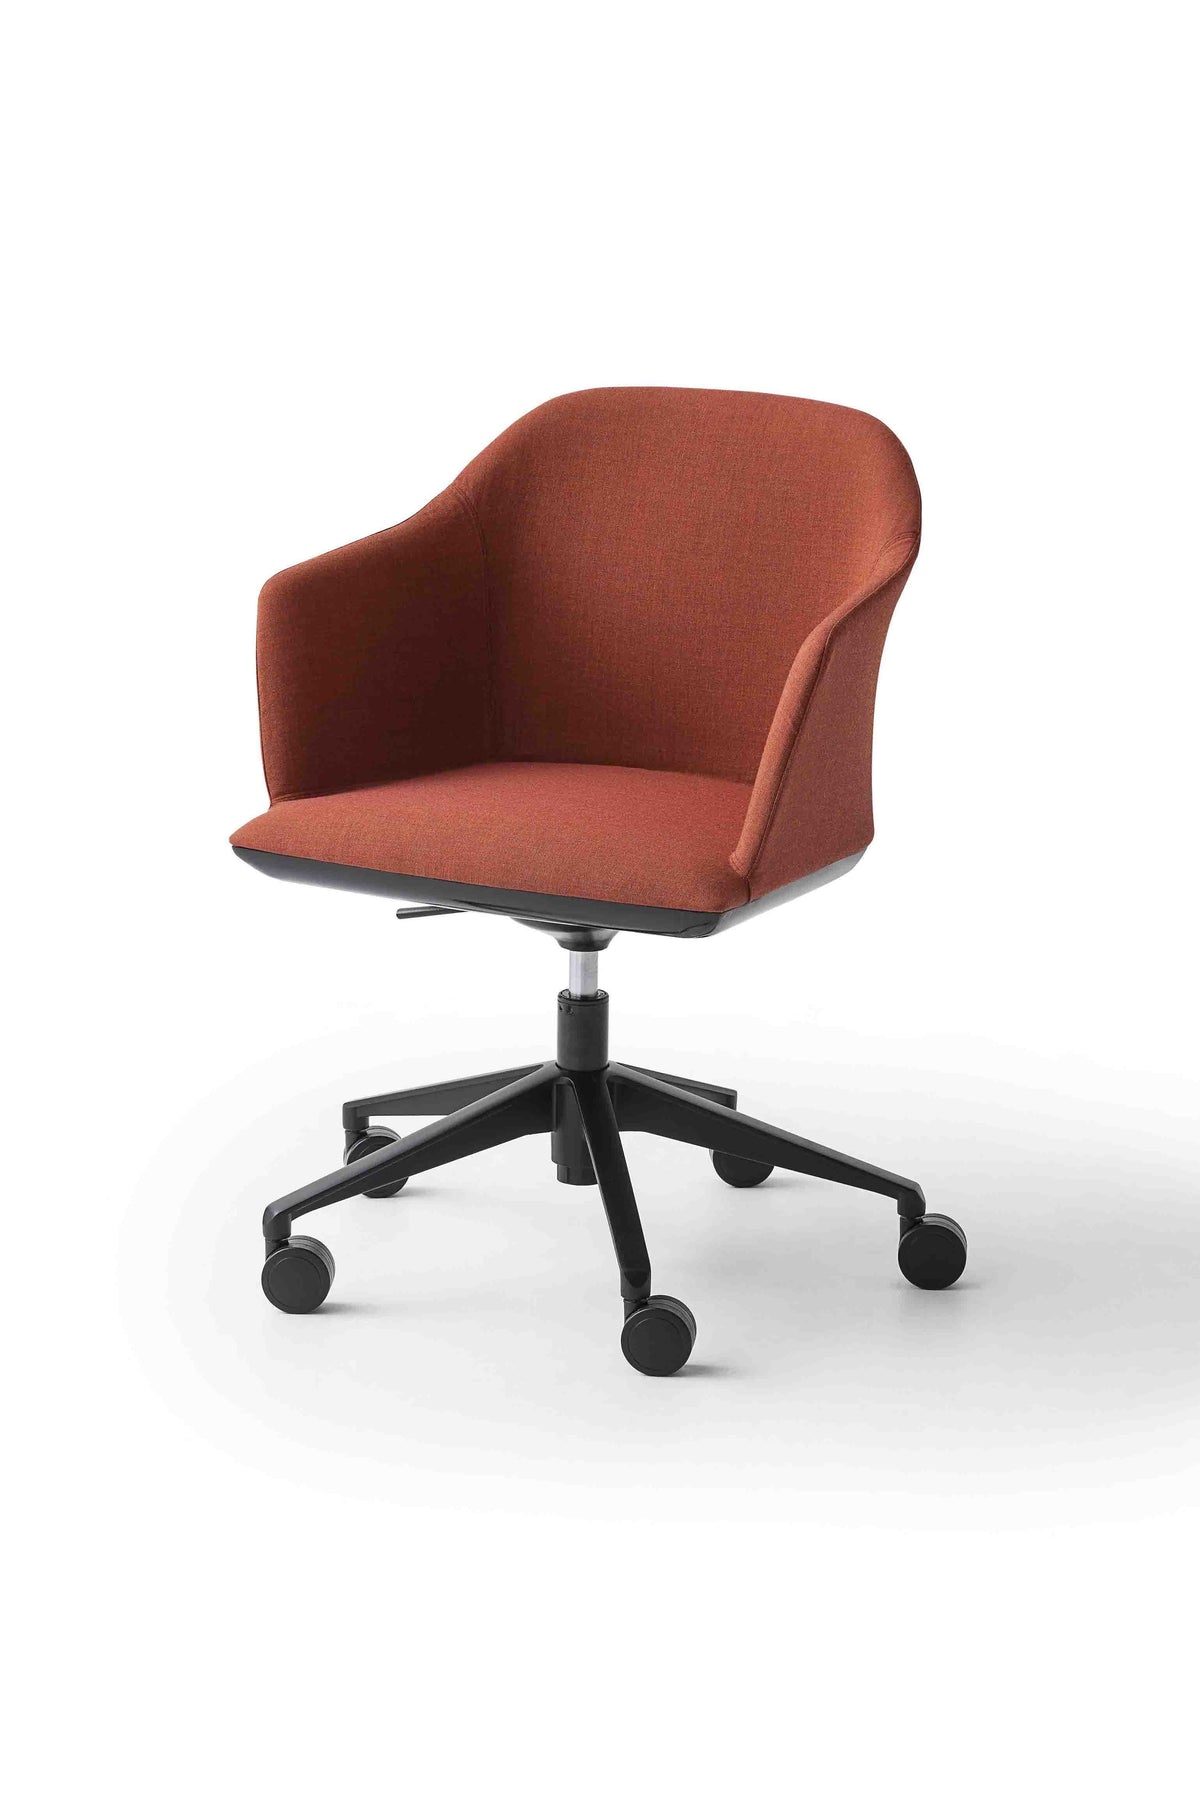 Manaa Armchair c/w Wheels-Gaber-Contract Furniture Store